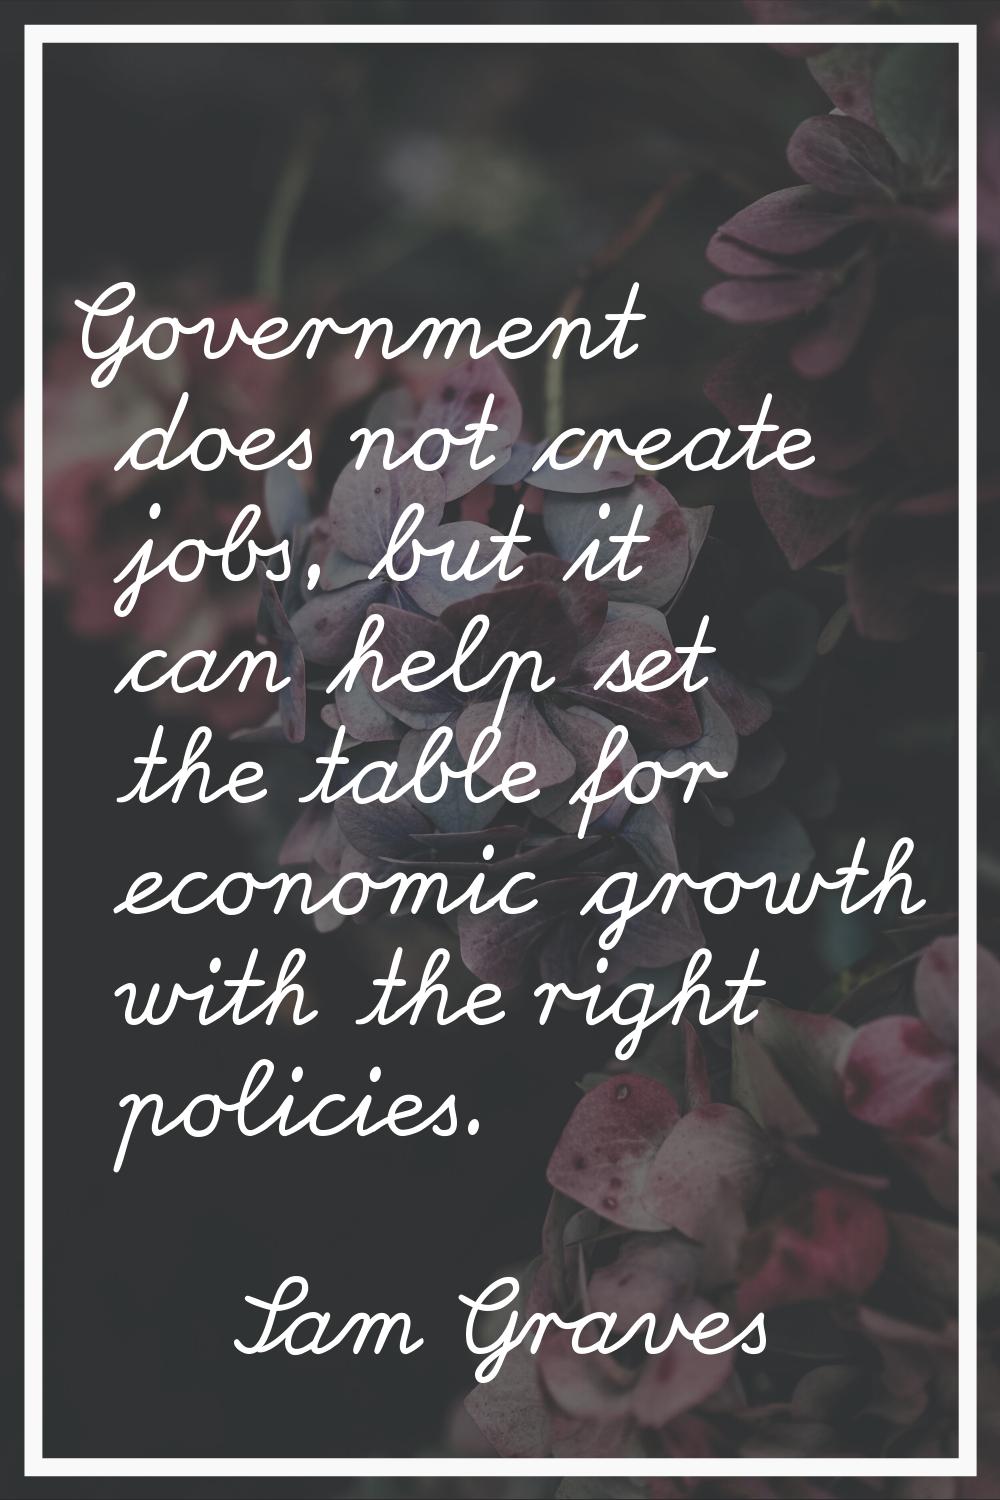 Government does not create jobs, but it can help set the table for economic growth with the right p